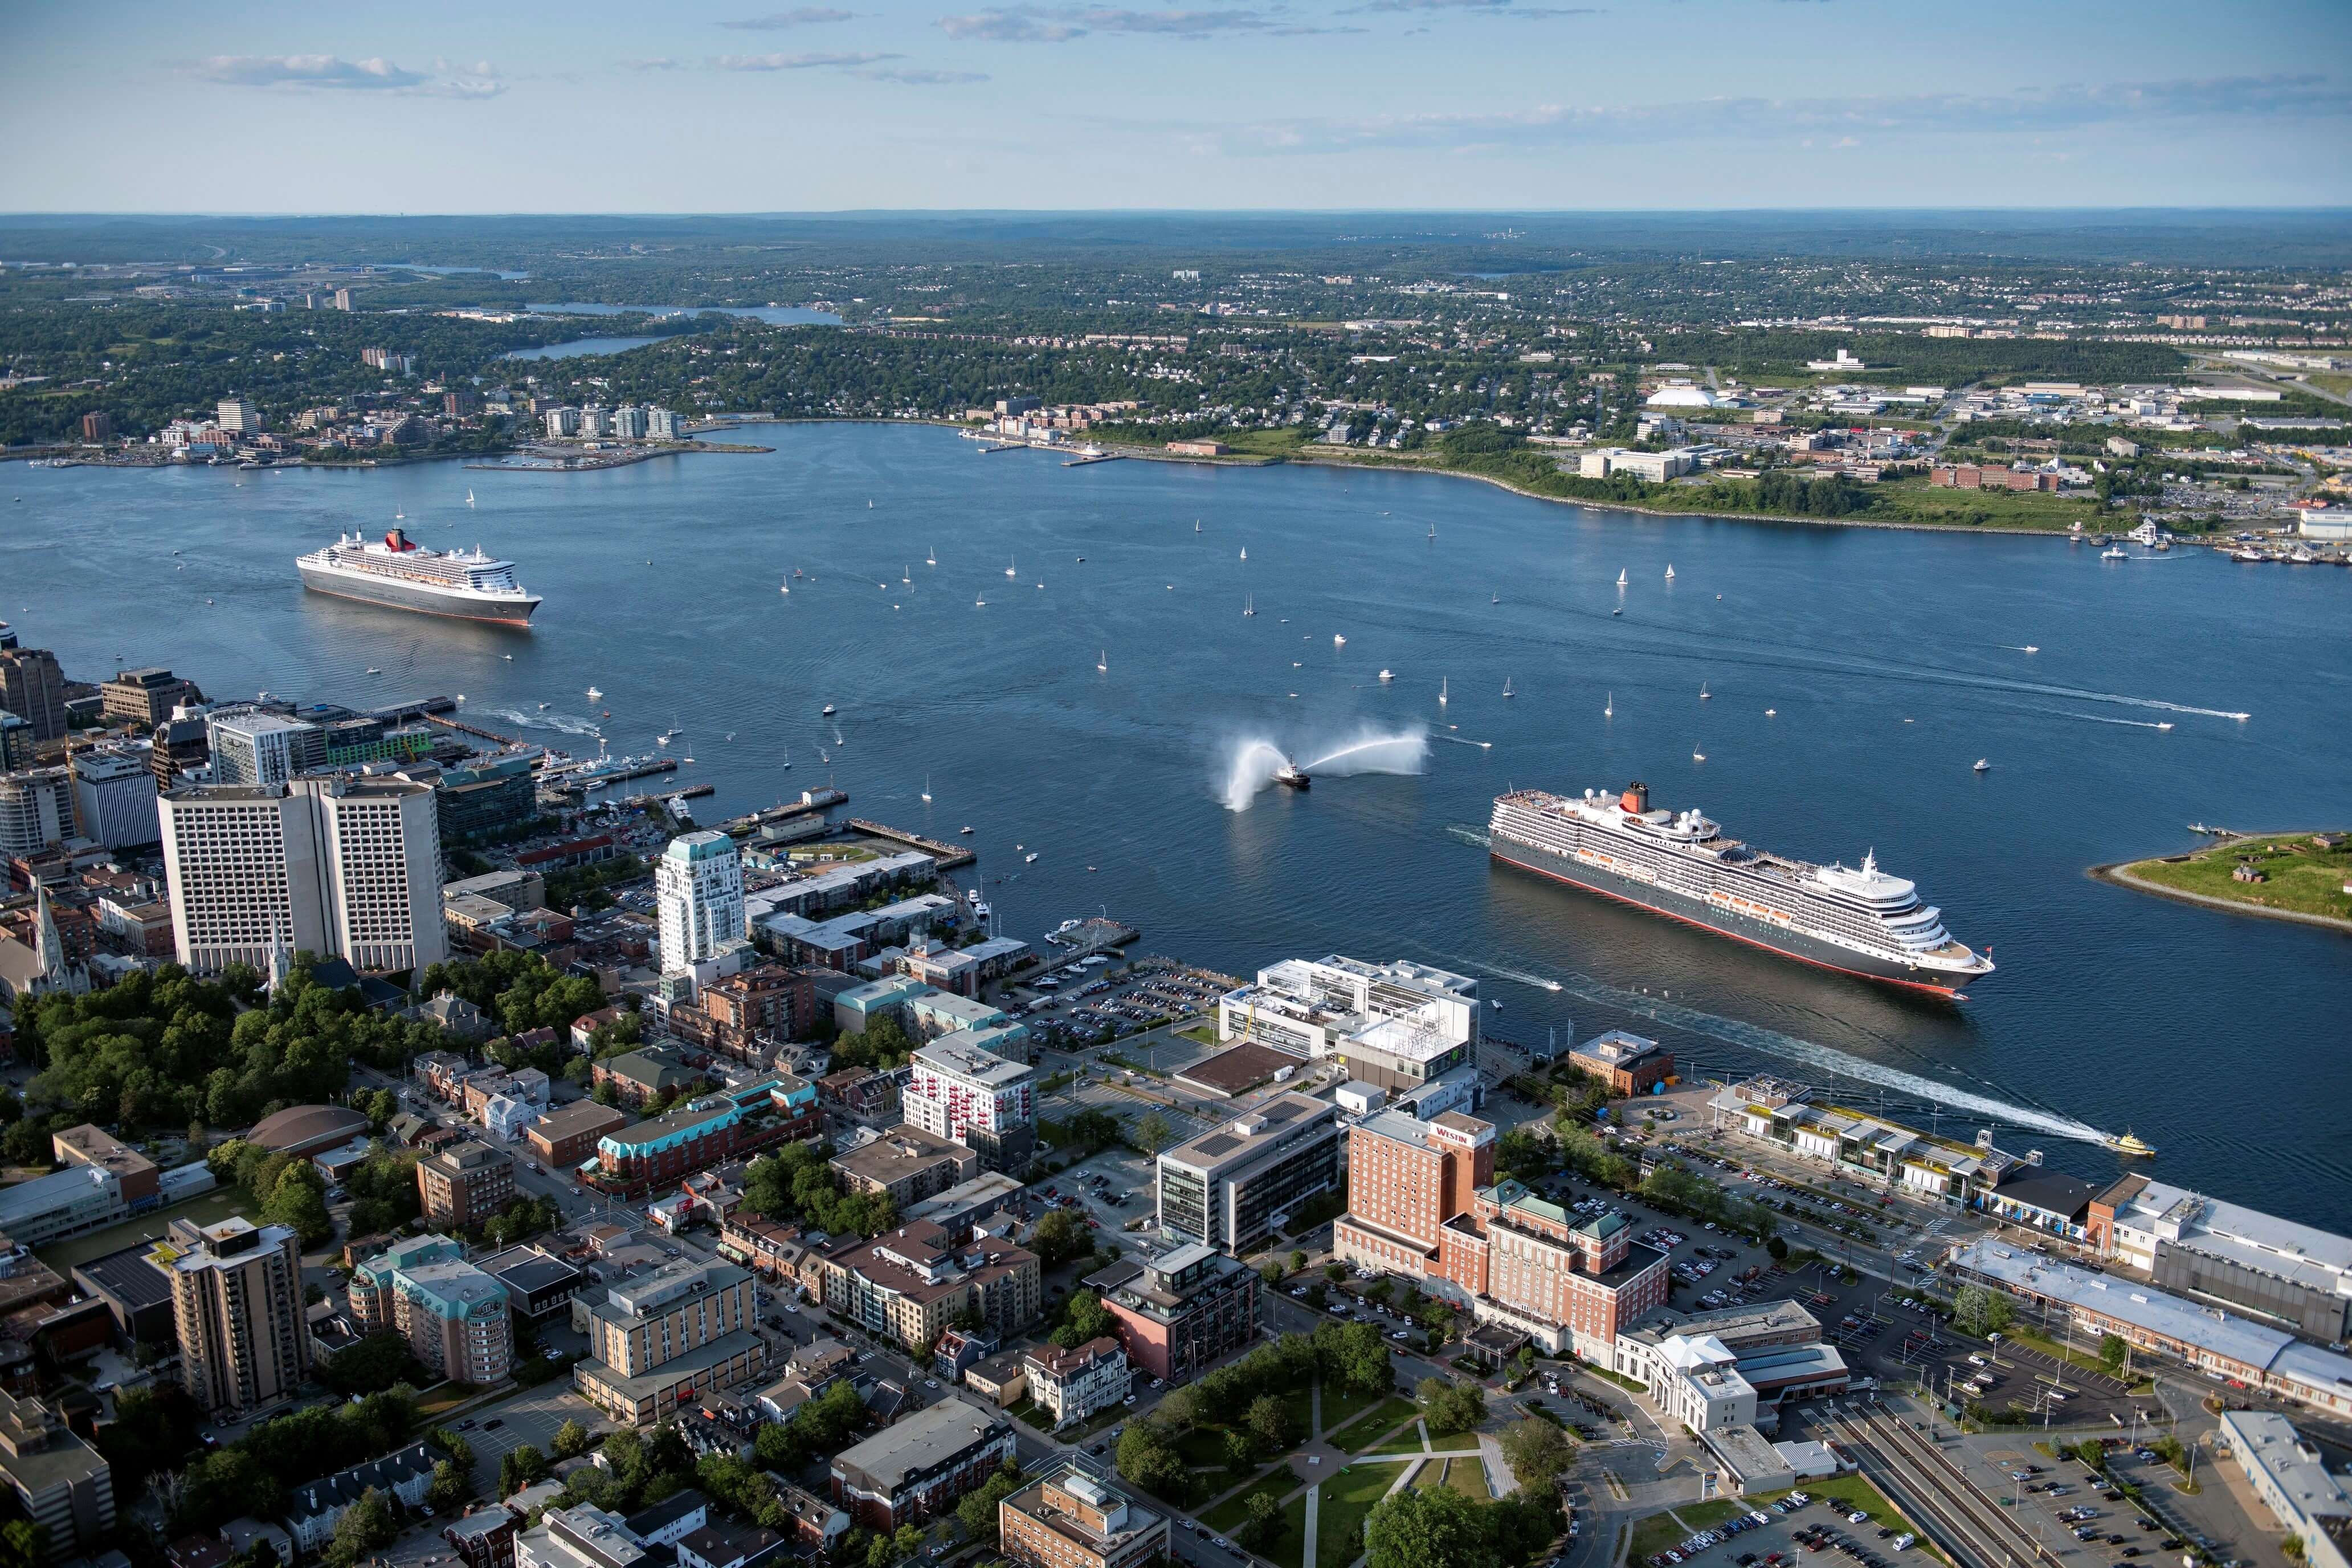 Queen Mary 2 meets Queen Elizabeth in Halifax for the first time